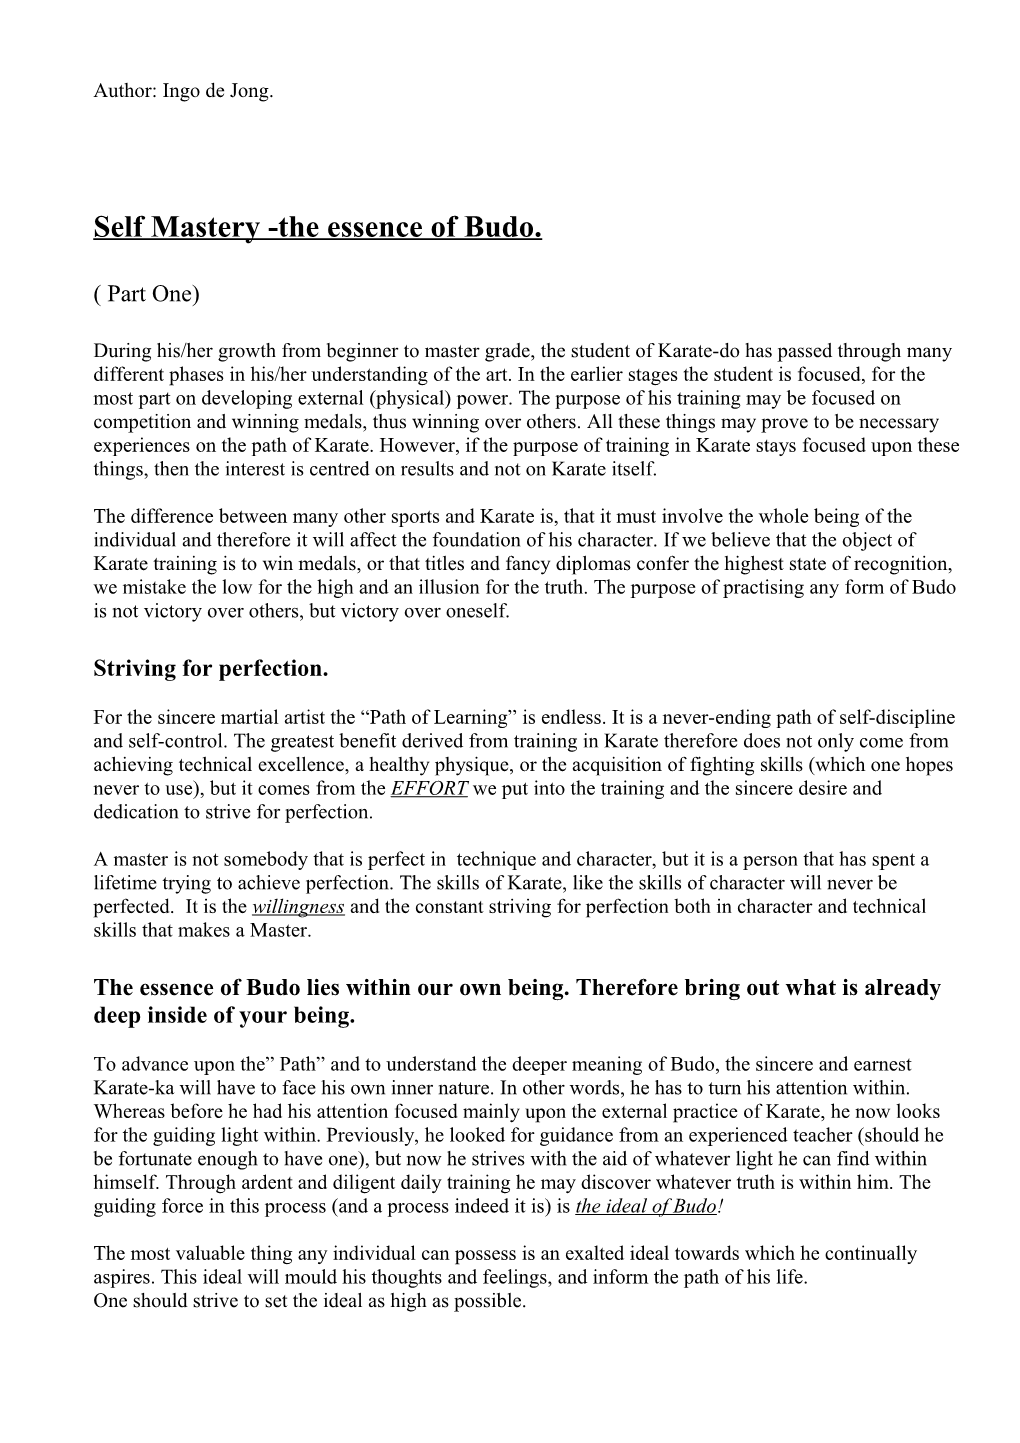 Self Mastery -The Essence of Budo ( Part One)